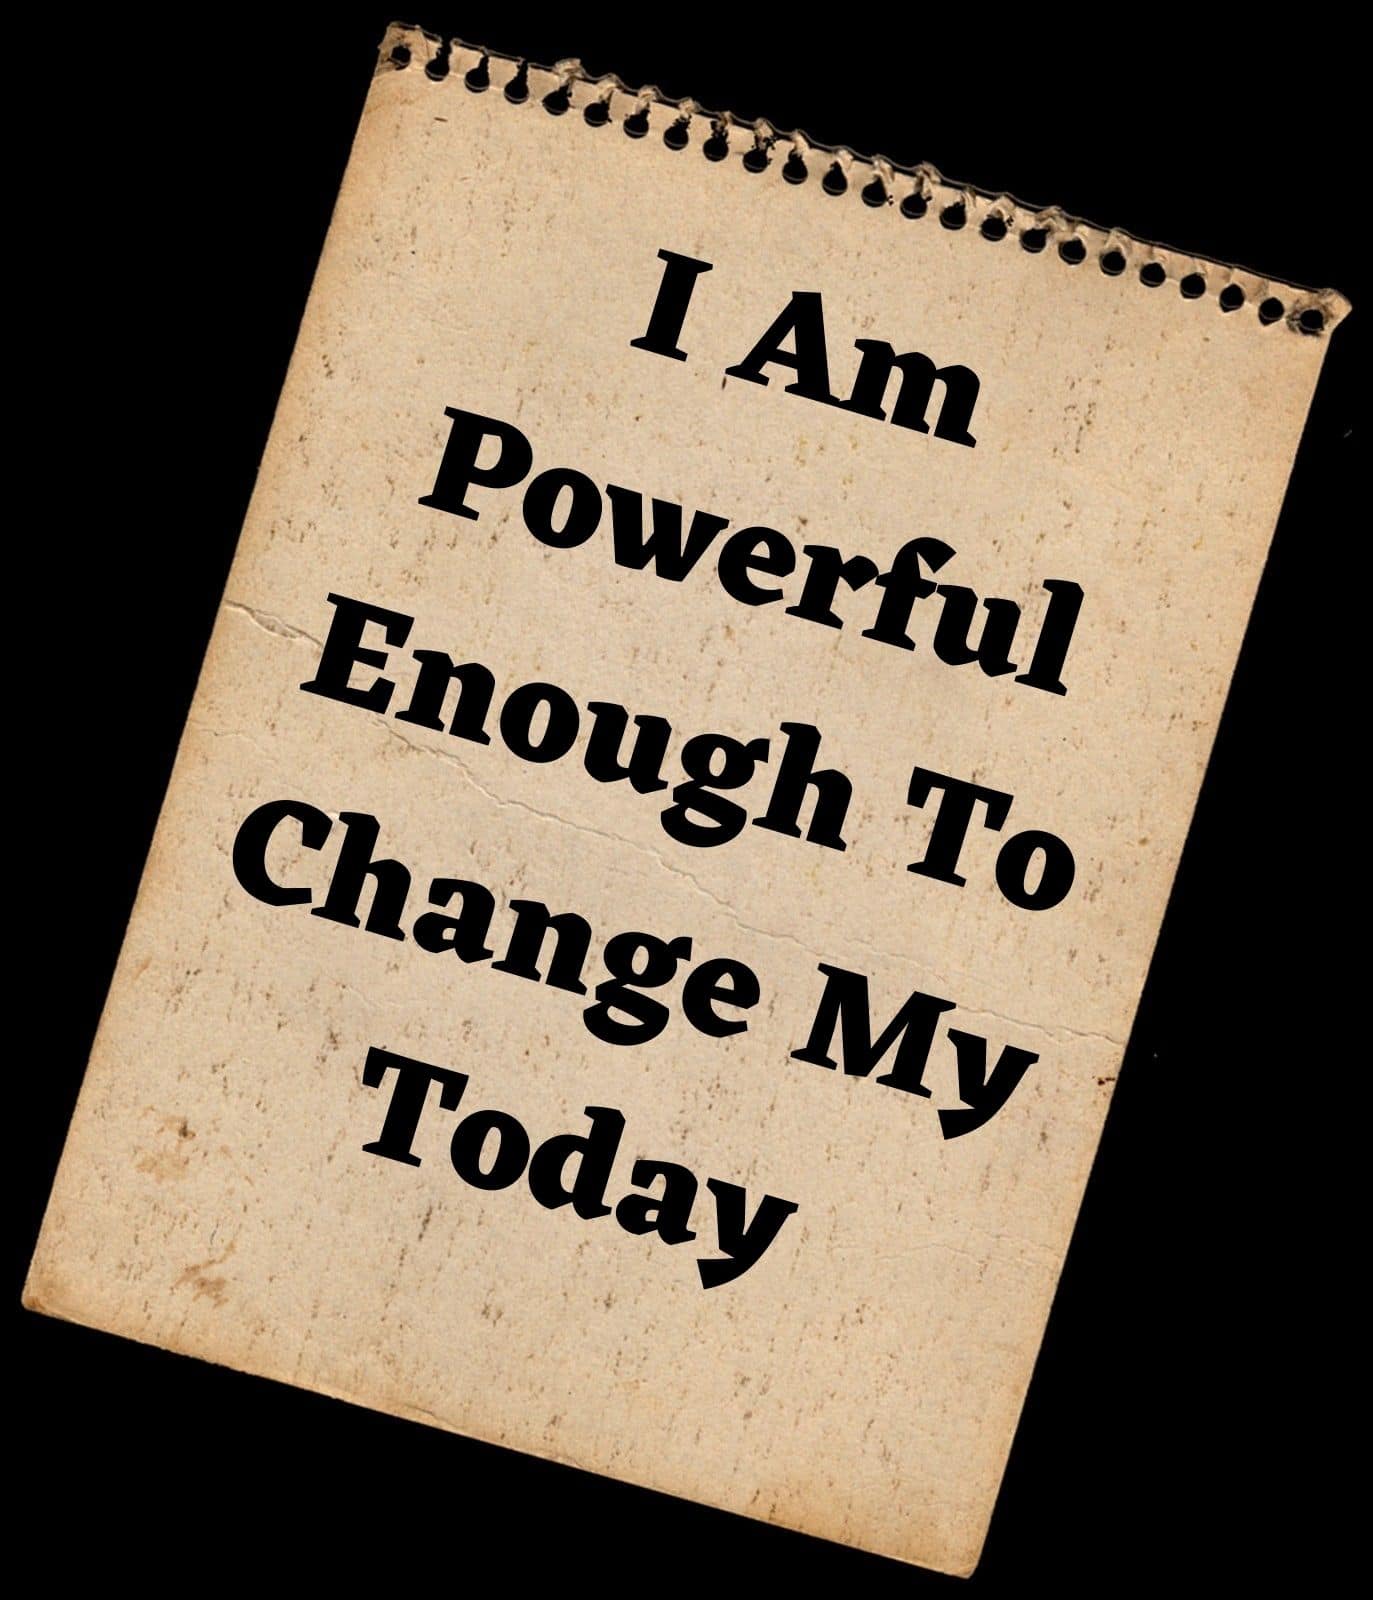 I AM POWERFUL ENOUGH TO CHANGE MY TODAY.